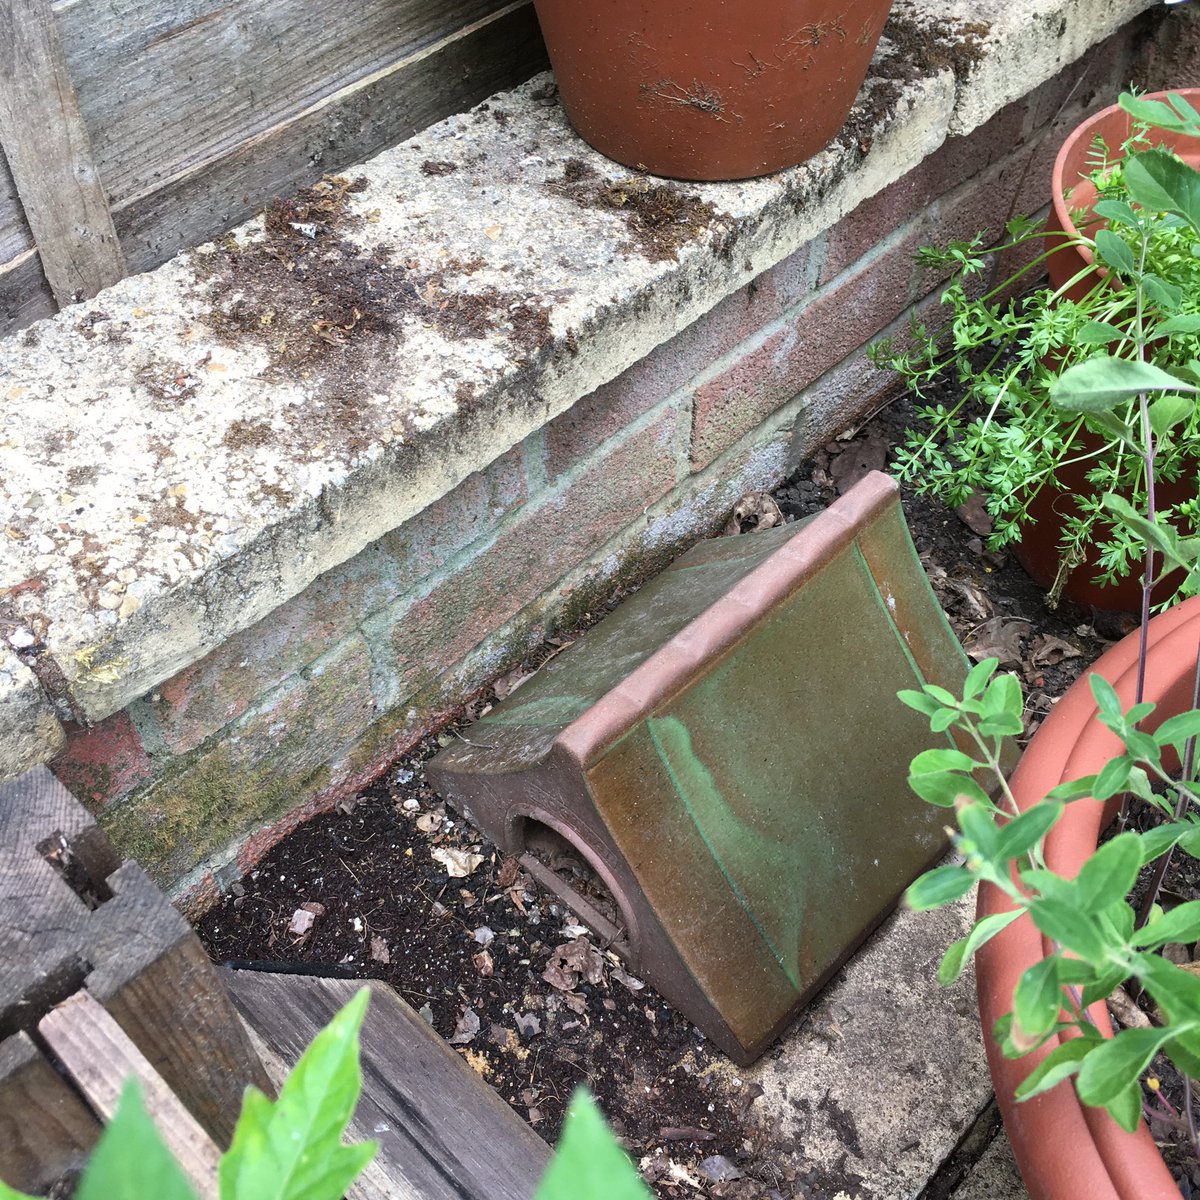 Today for  #30DaysWild a tour of the corners and creases in our garden that provide sanctuary for wildlife. A bug mansion from old bricks and tiles, a barrel pond with stone steps, a hibernarium topped with old pots and tree prunings and frog alley filled with soil and leaf litter